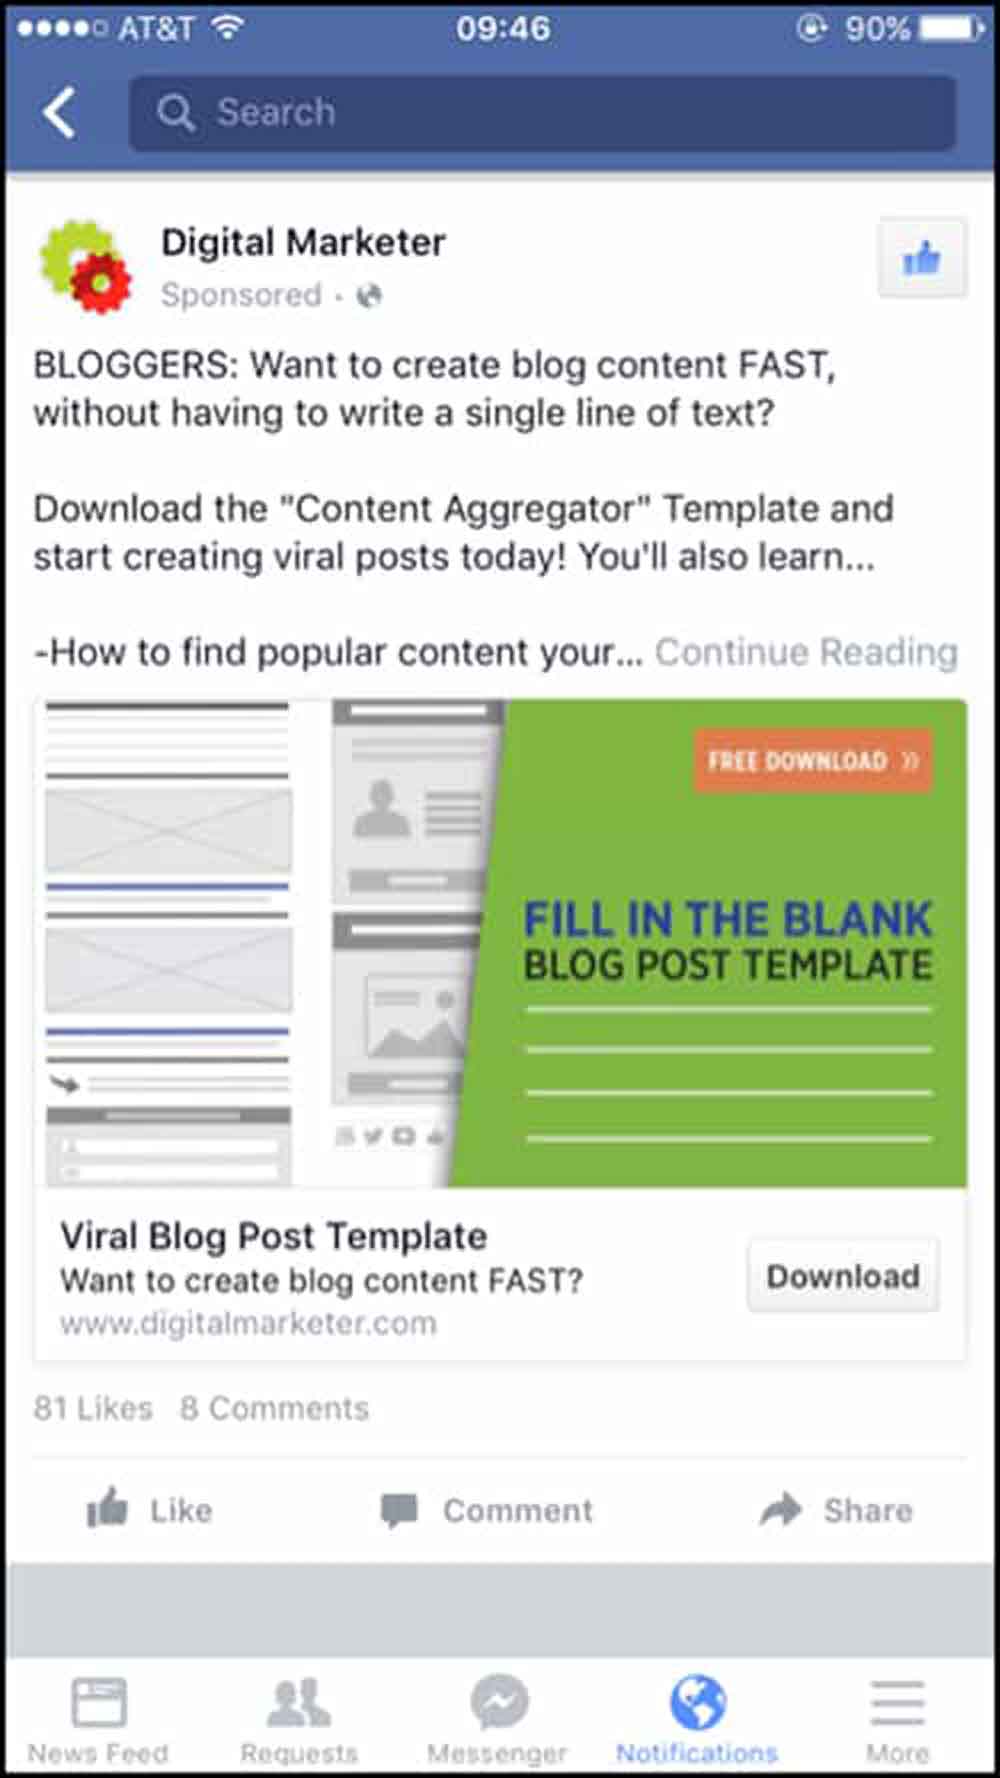 Using Facebook Ads to drive traffic - Example from Digital Marketer